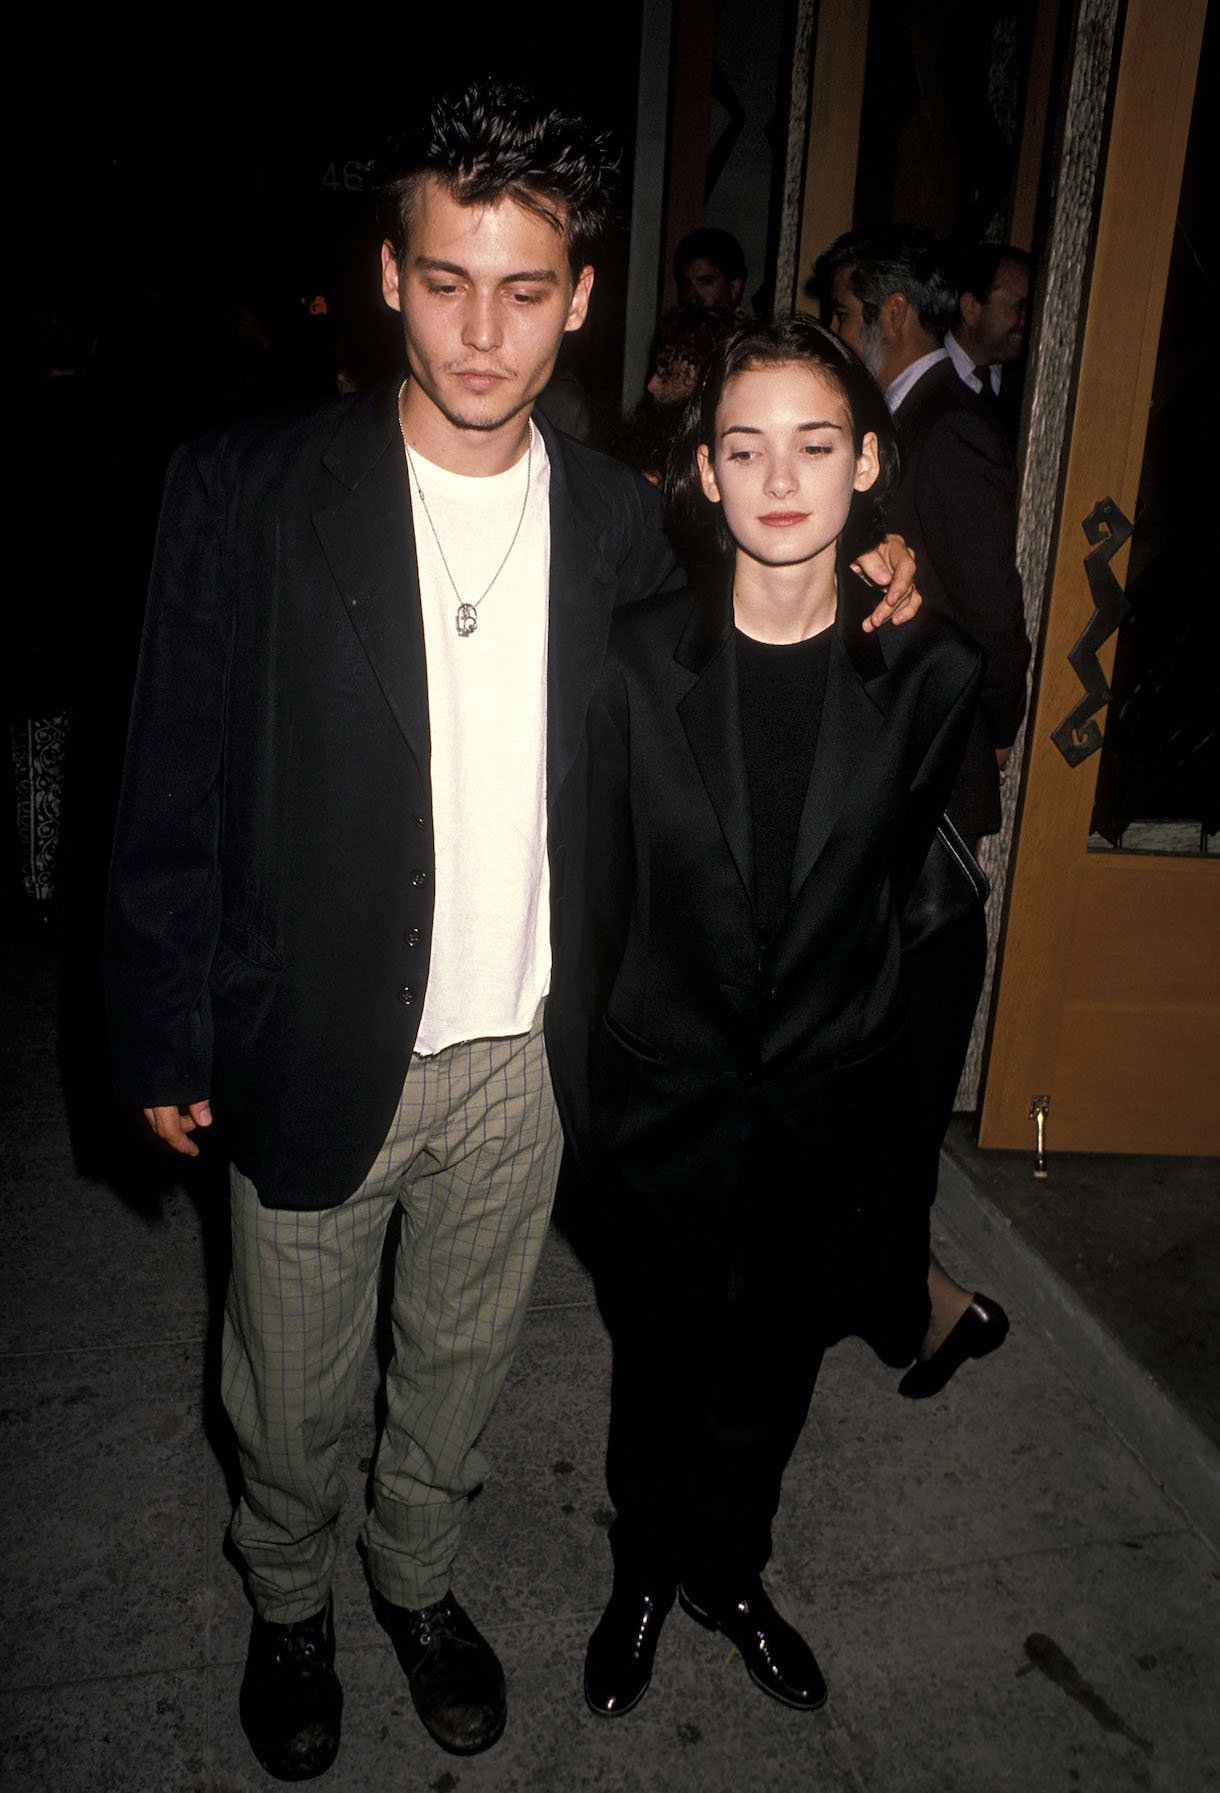 Actor Johnny Depp and actress Winona Ryder in the 90s